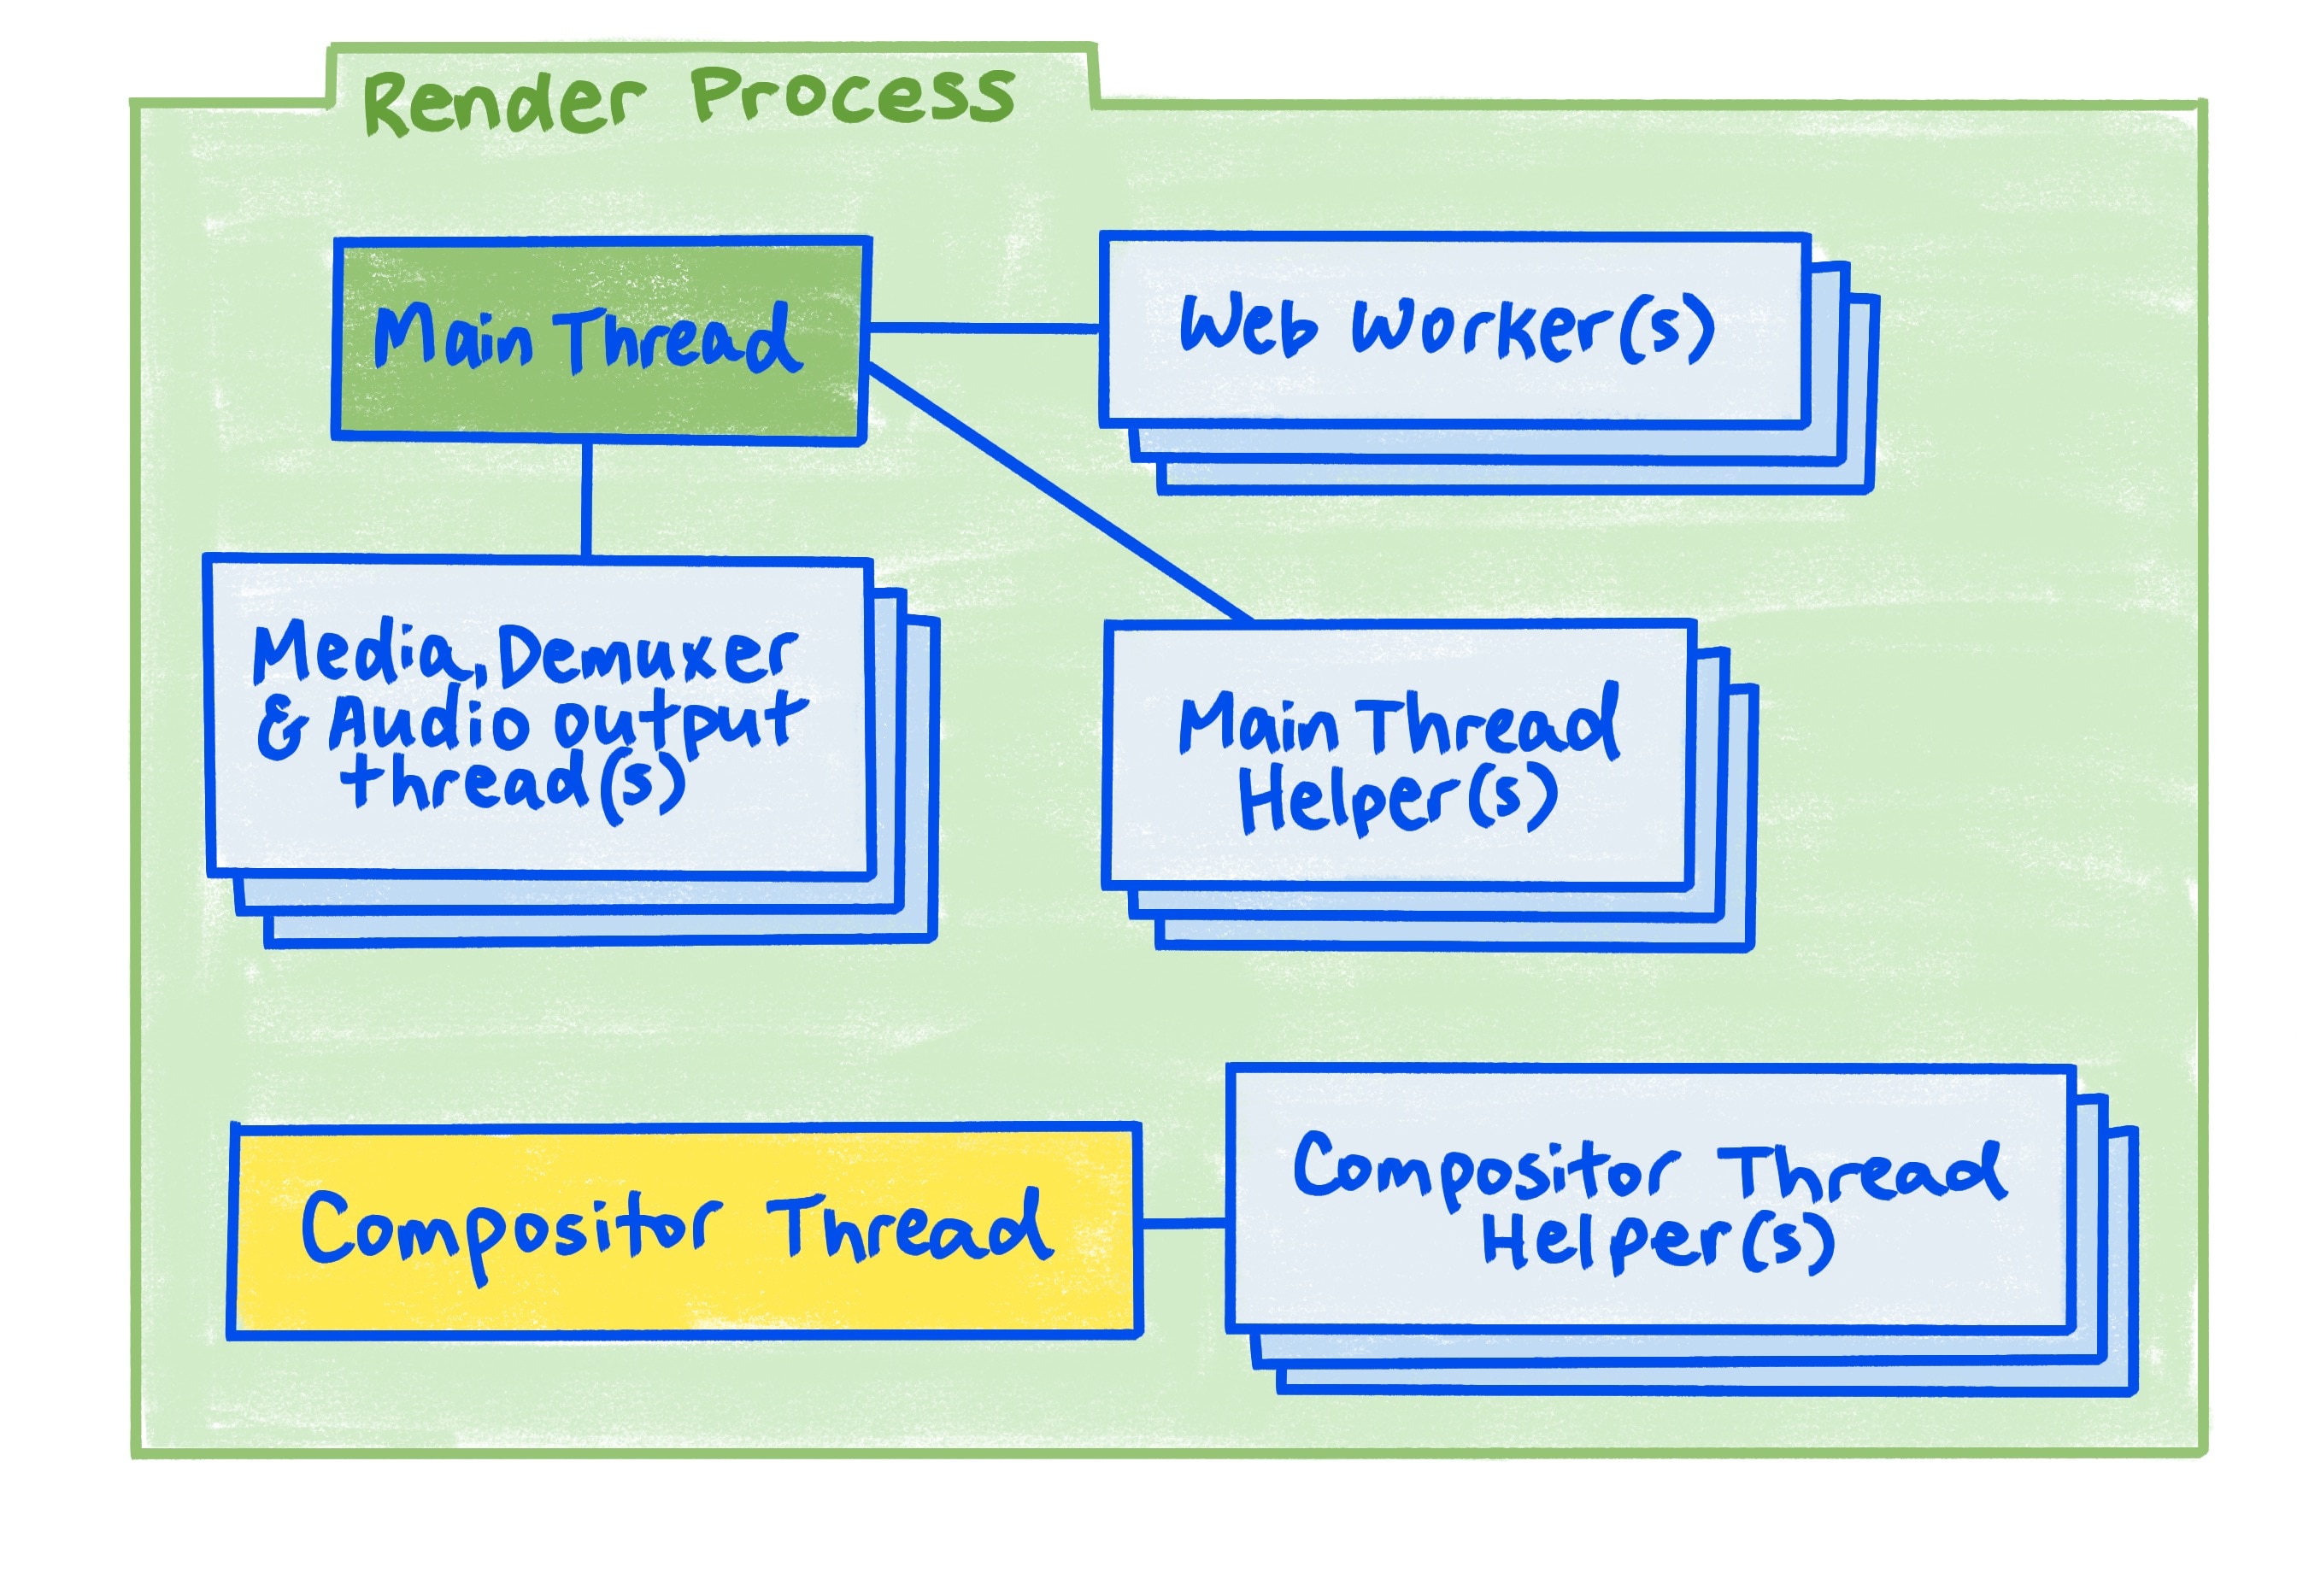 A diagram of the render process as described in the article.